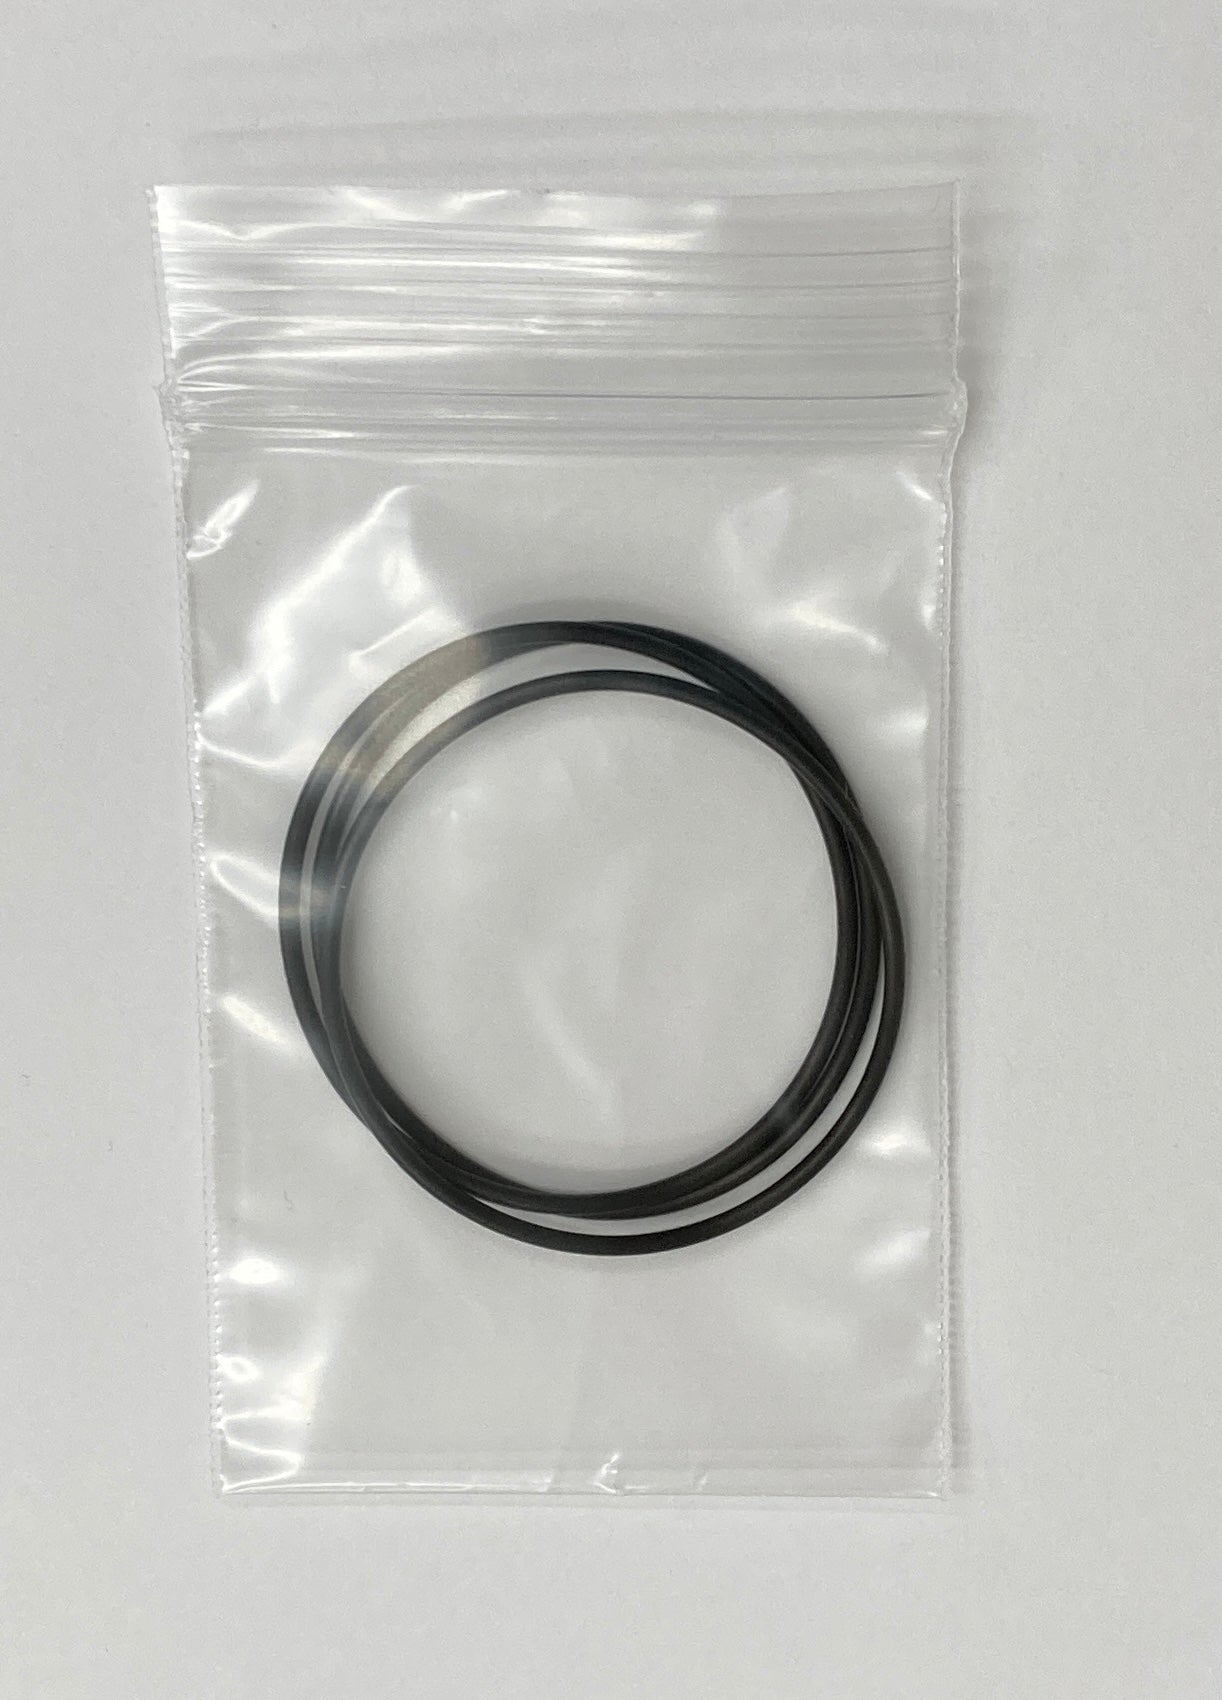 China Factory Rubber O Ring Seal NBR FKM FPM EPDM PTFE PU Nitrile Silicone  Flat Rubber O-Ring Seals - China O Ring, Rubber O-Ring | Made-in-China.com